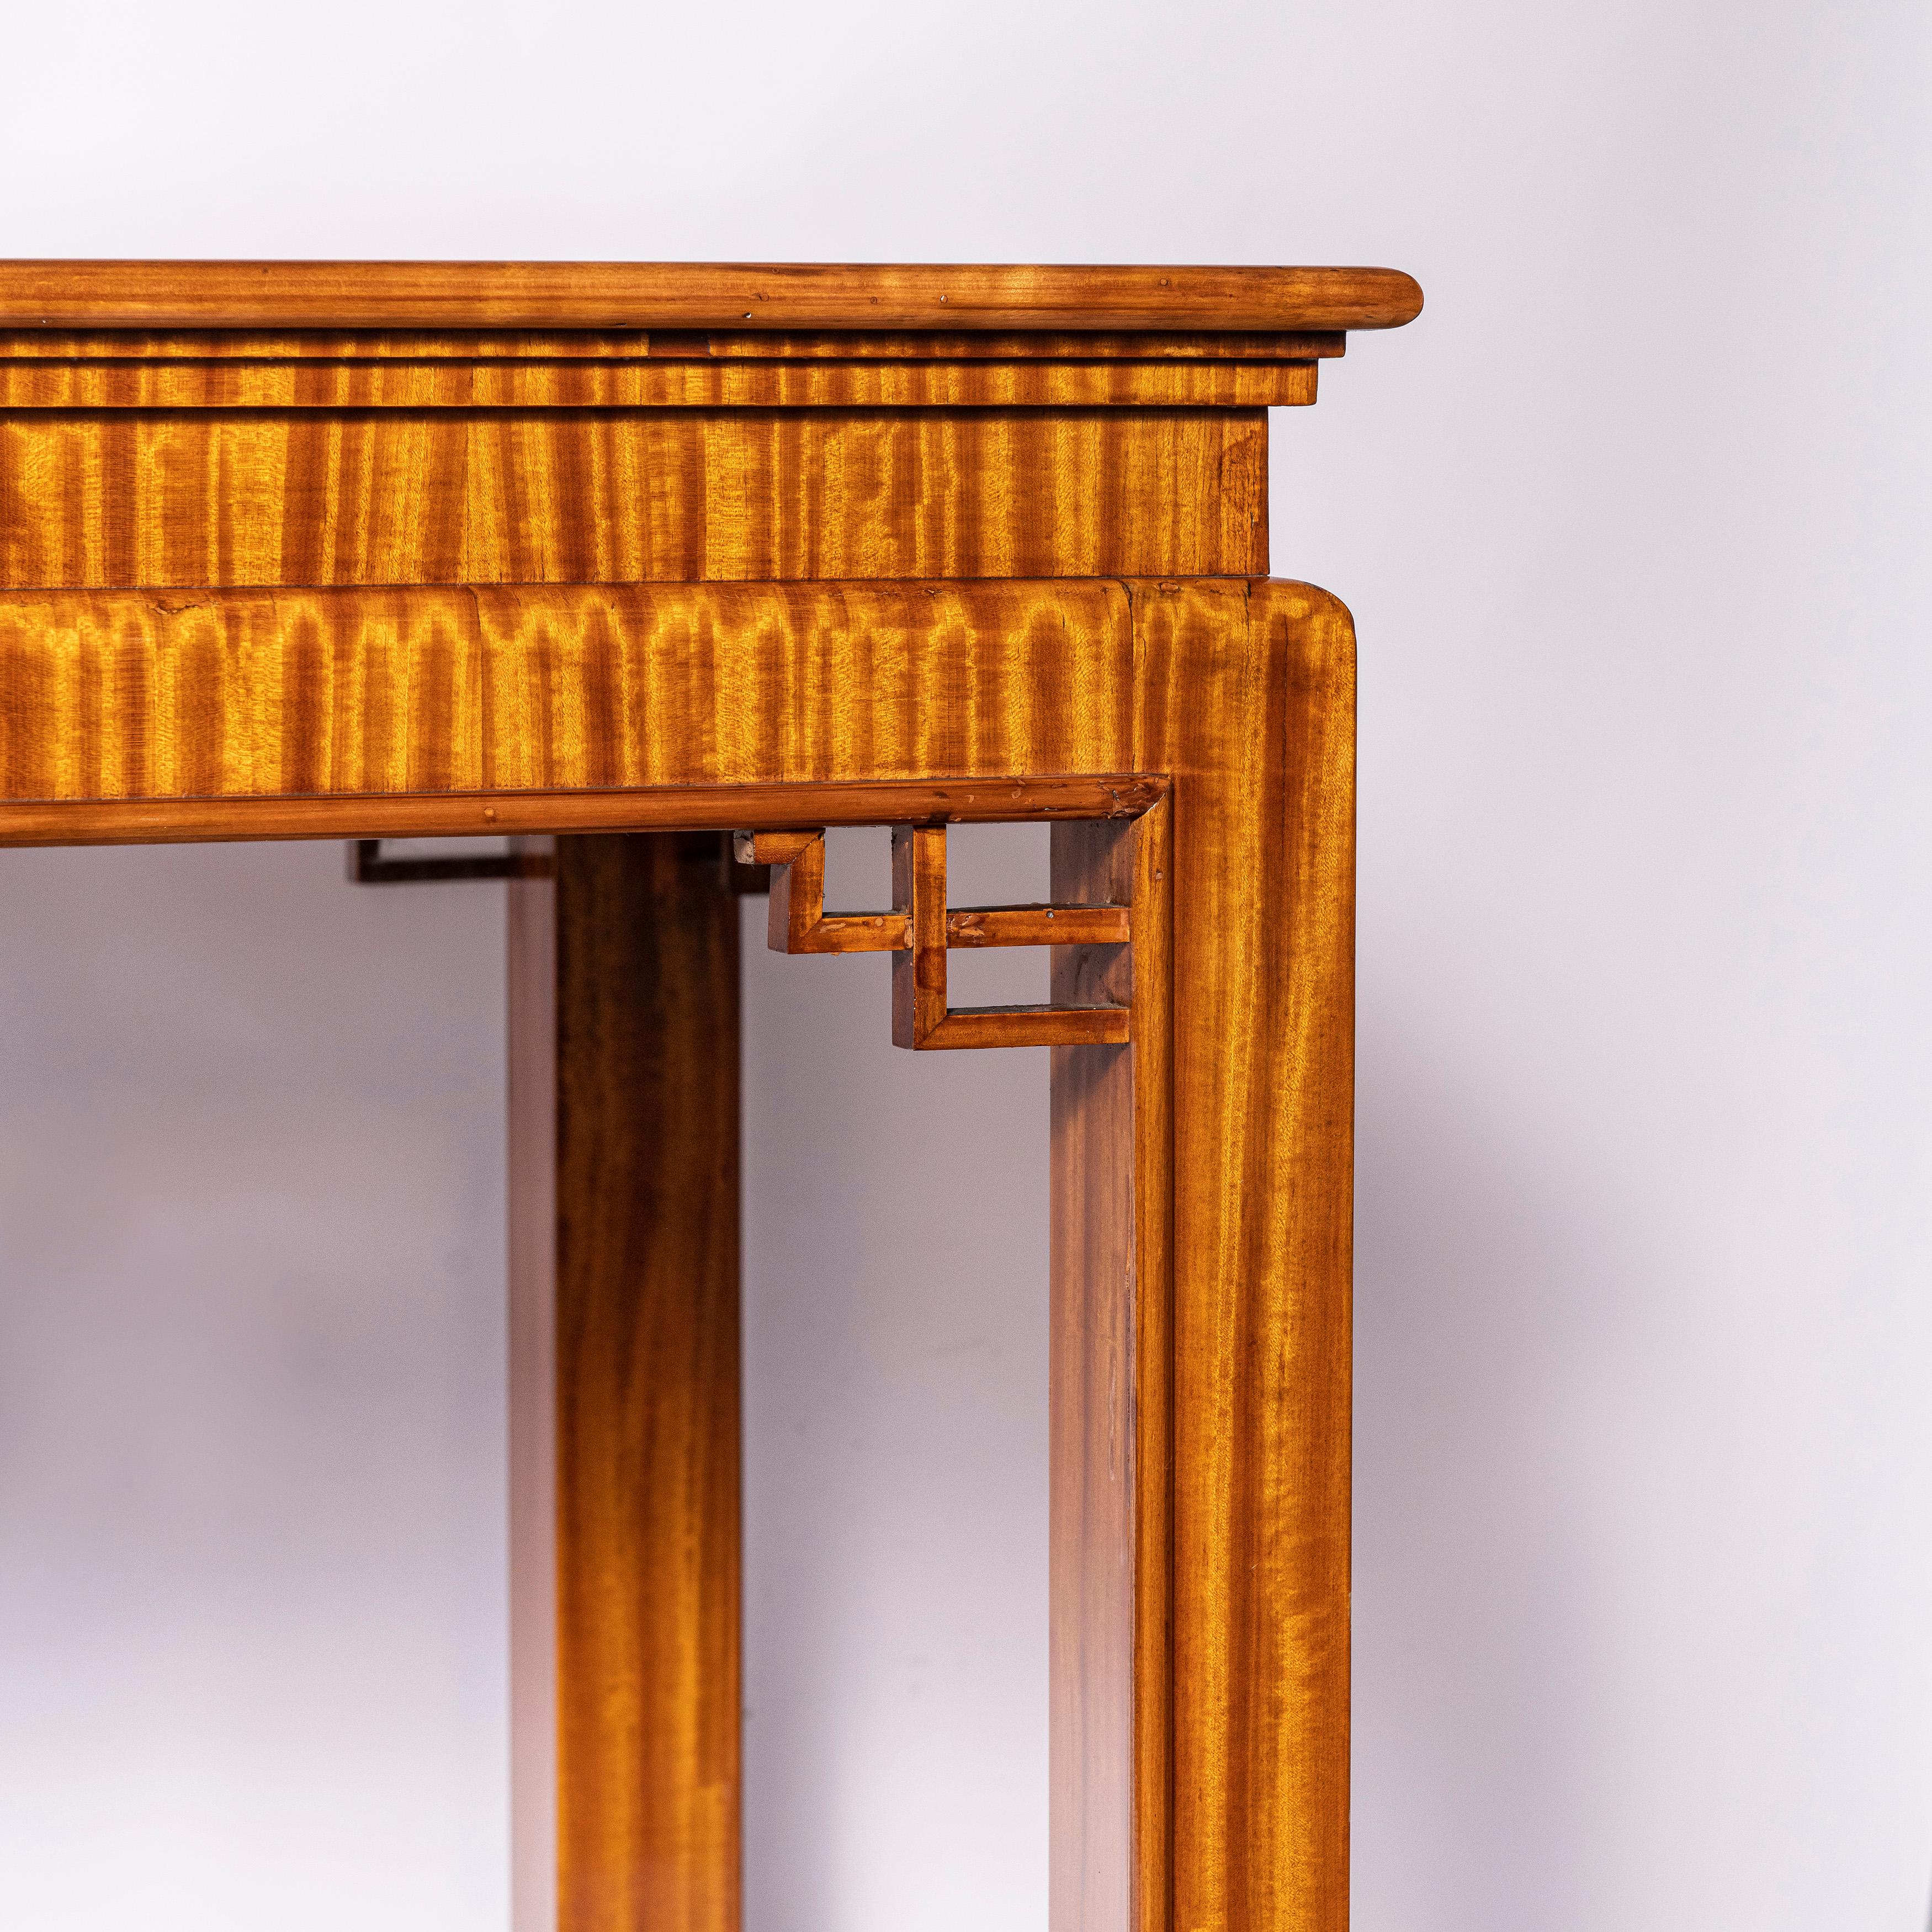 Argentine Citronnier Wood Side Table by Englander & Bonta, Argentina, circa 1950 For Sale